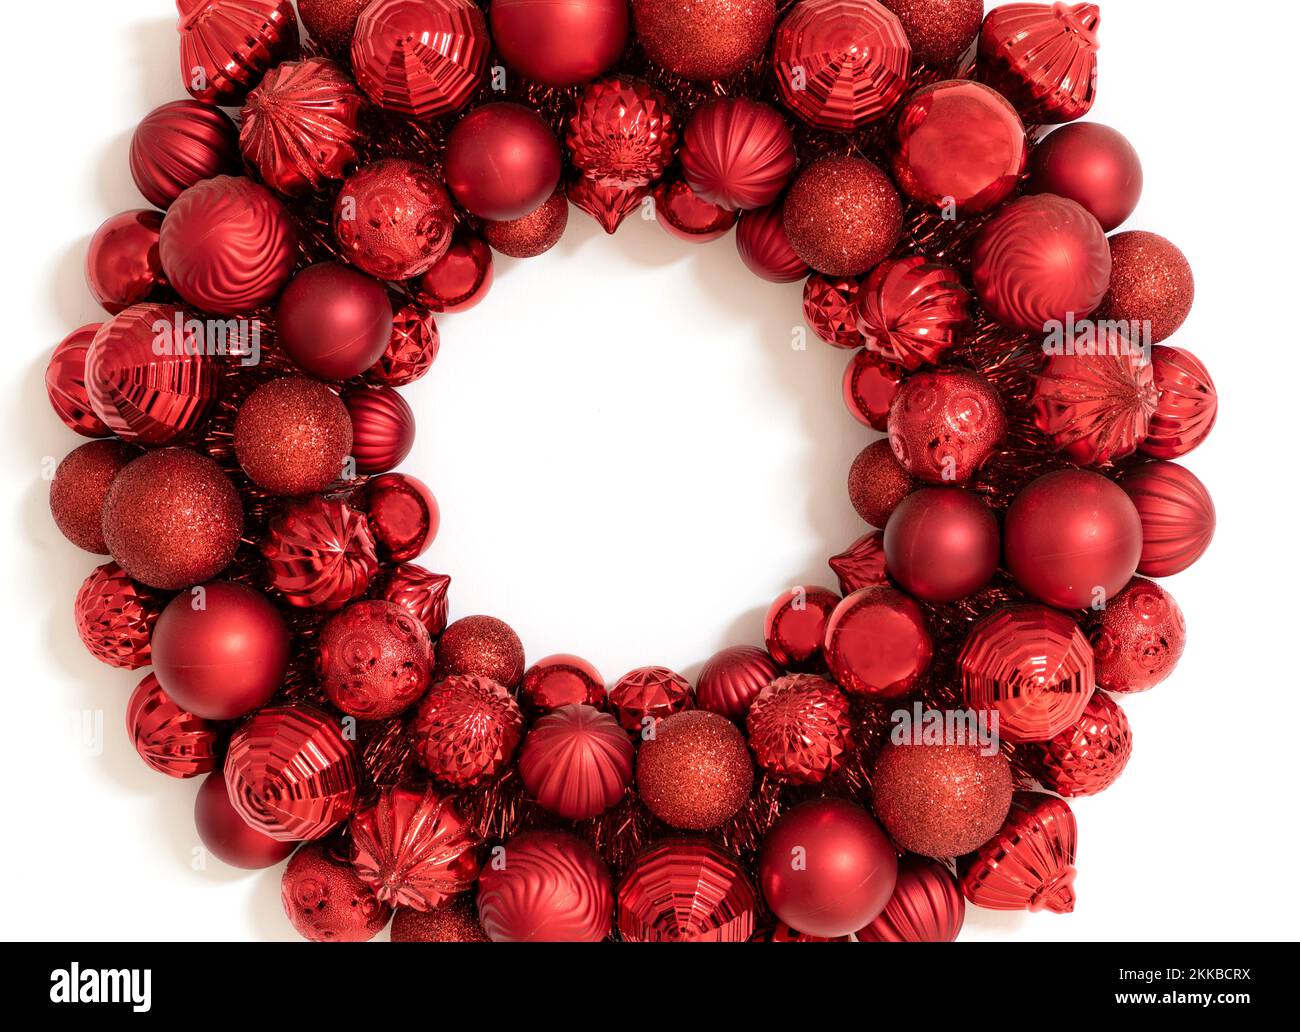 Merry Christmas holiday greeting card or background without text.  Red Wreath made of red Christmas ornaments. Stock Photo